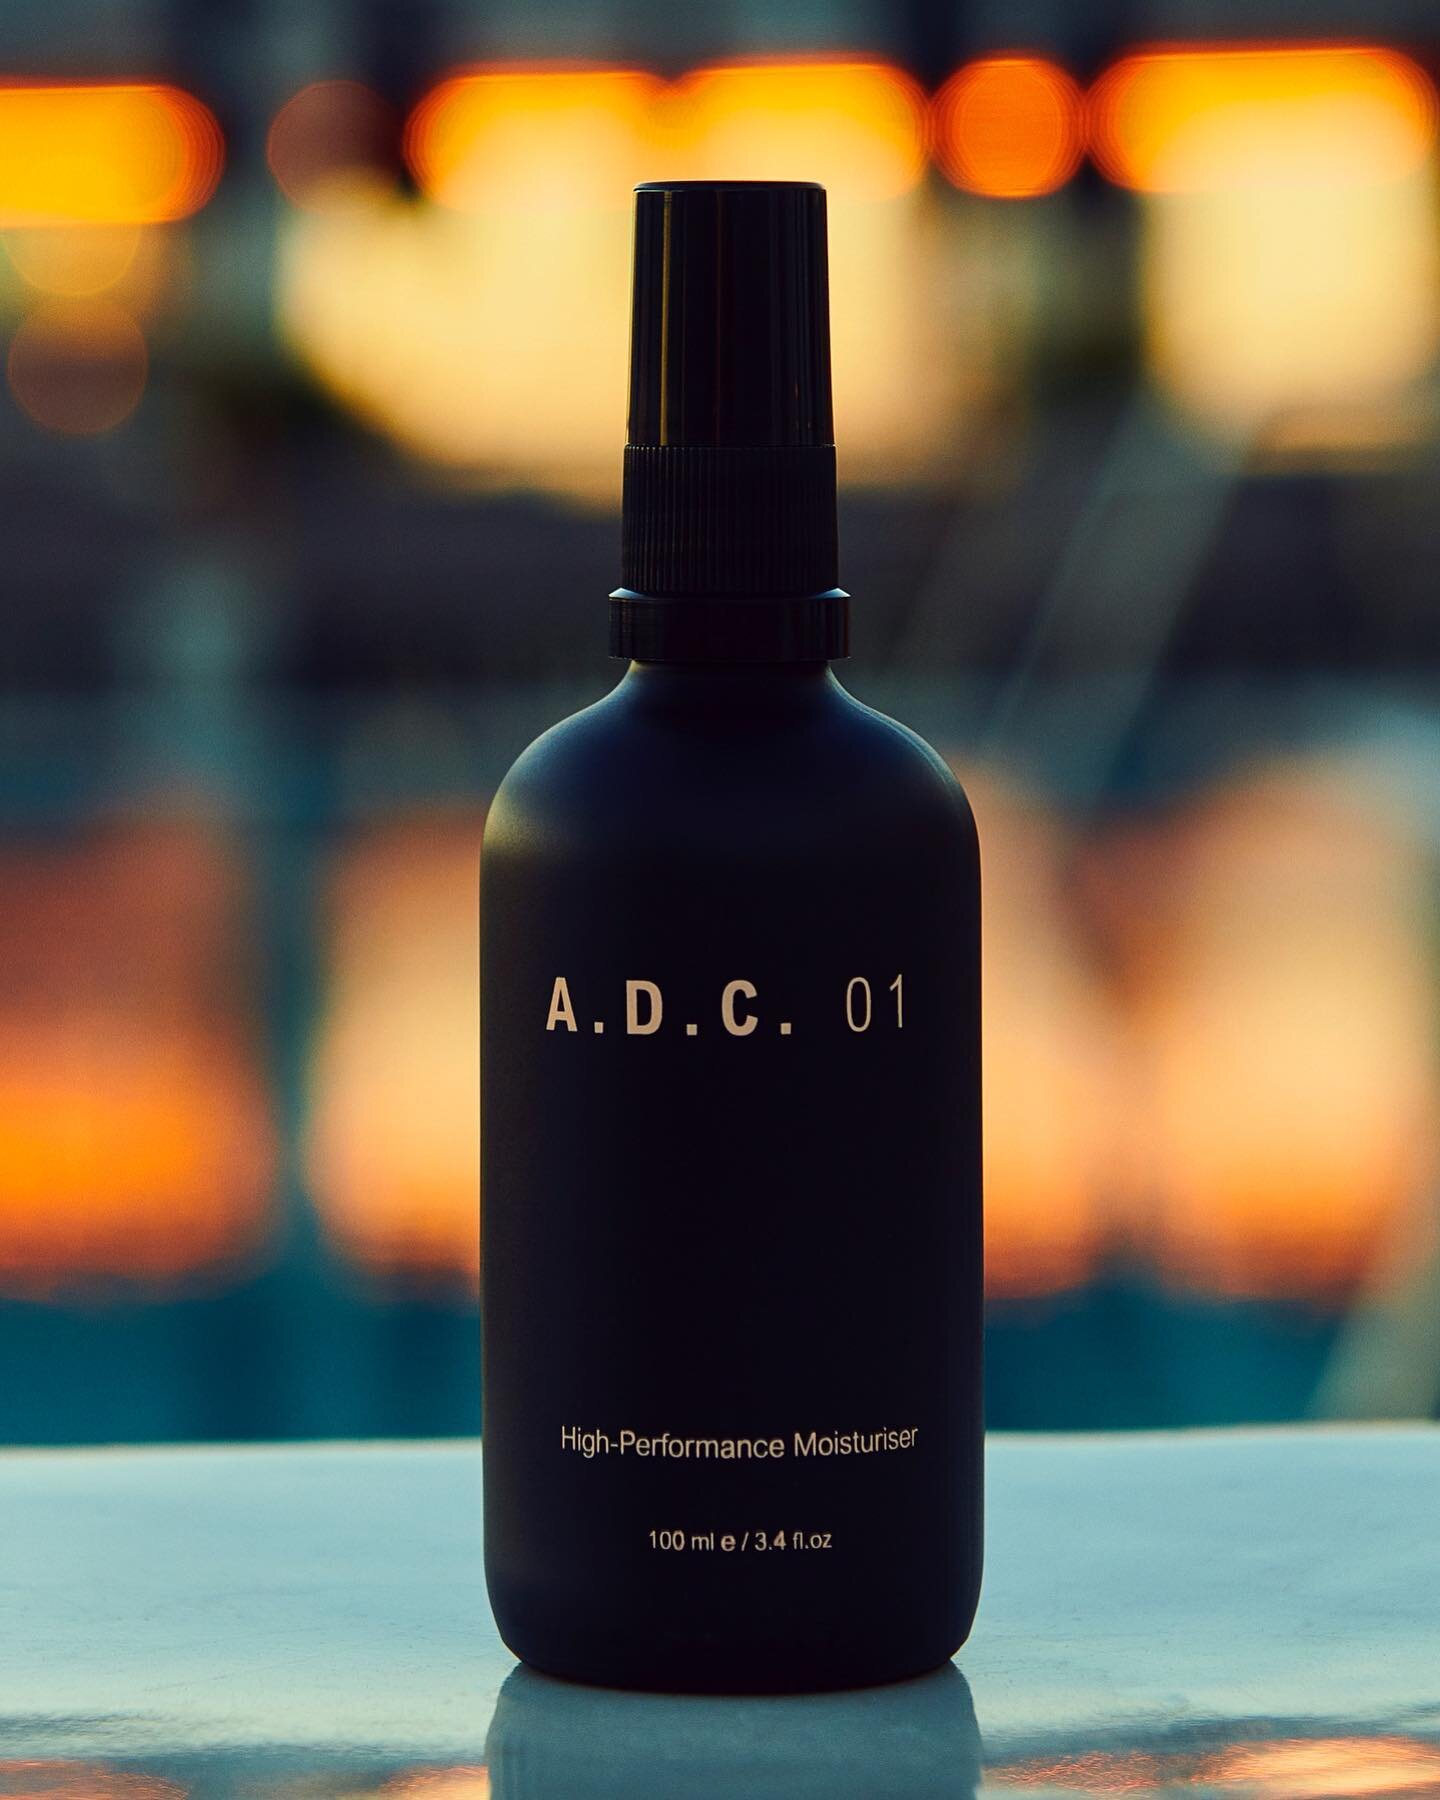 A.D.C. 01 High Performance Multifunctional Moisturiser only uses powerful natural, plant-based ingredients that are sustainably sourced. Active botanicals that really work.
No chemicals.
No parabens.
No animals harmed. 
Beauty without compromise. 

#